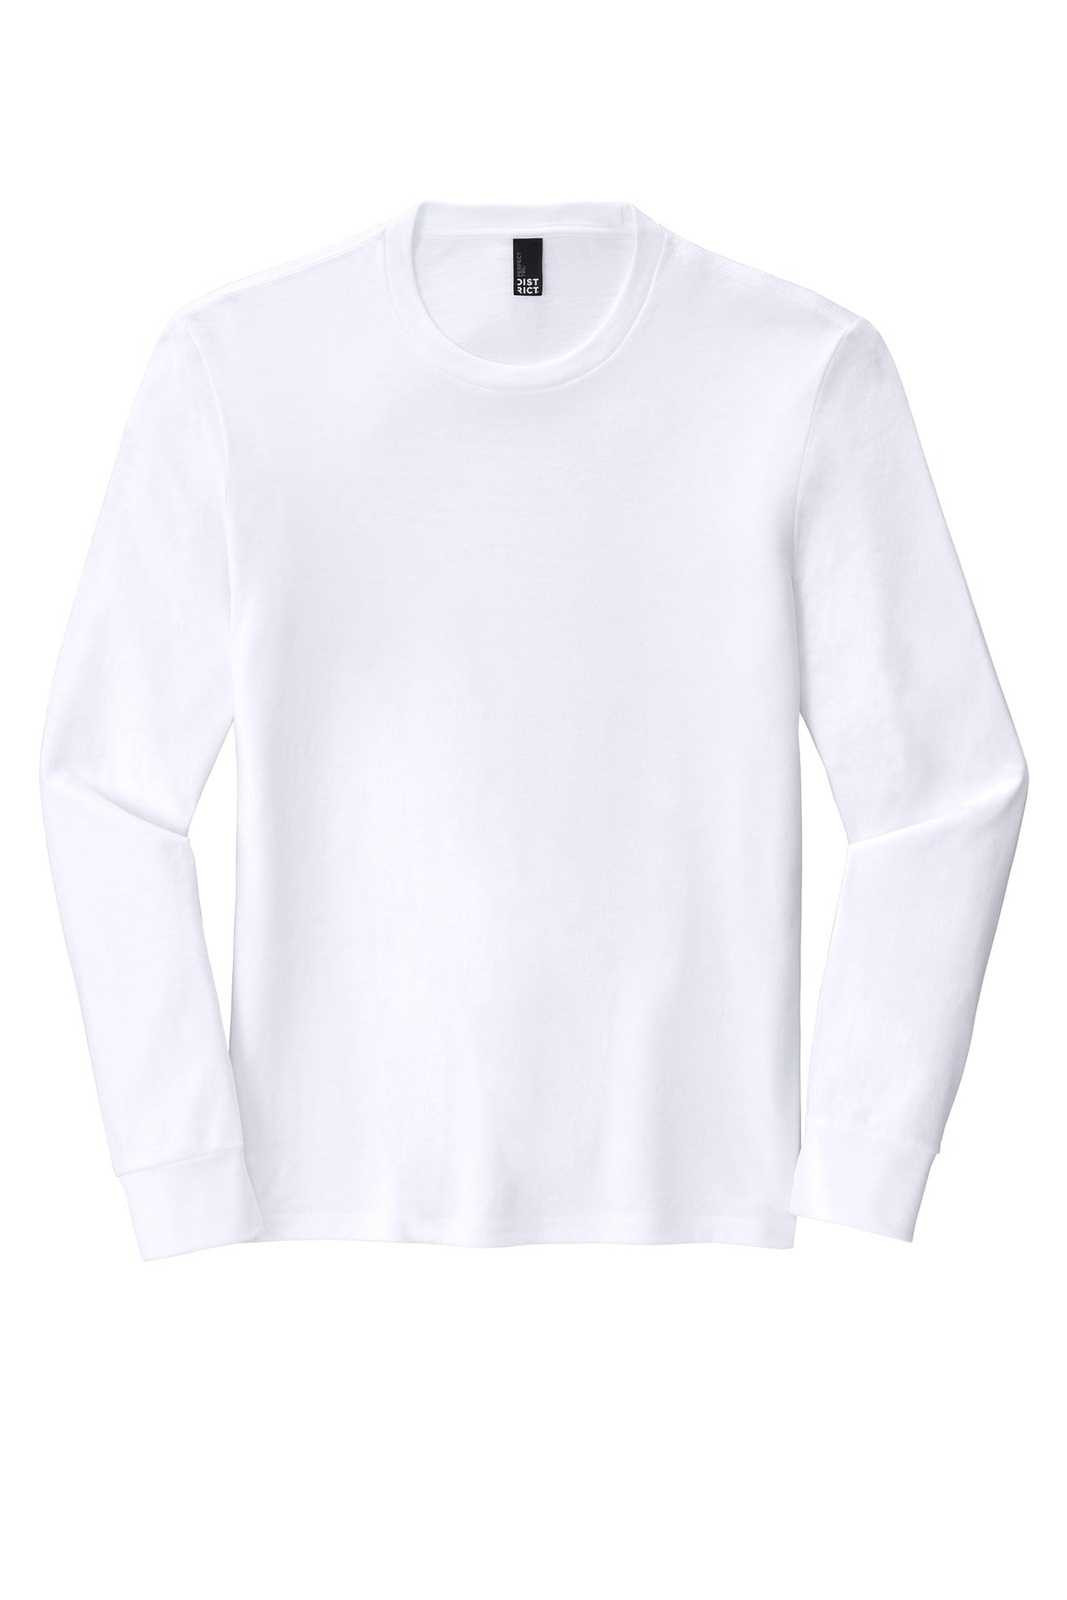 District DM132 Perfect Tri Long Sleeve Tee - White - HIT a Double - 1